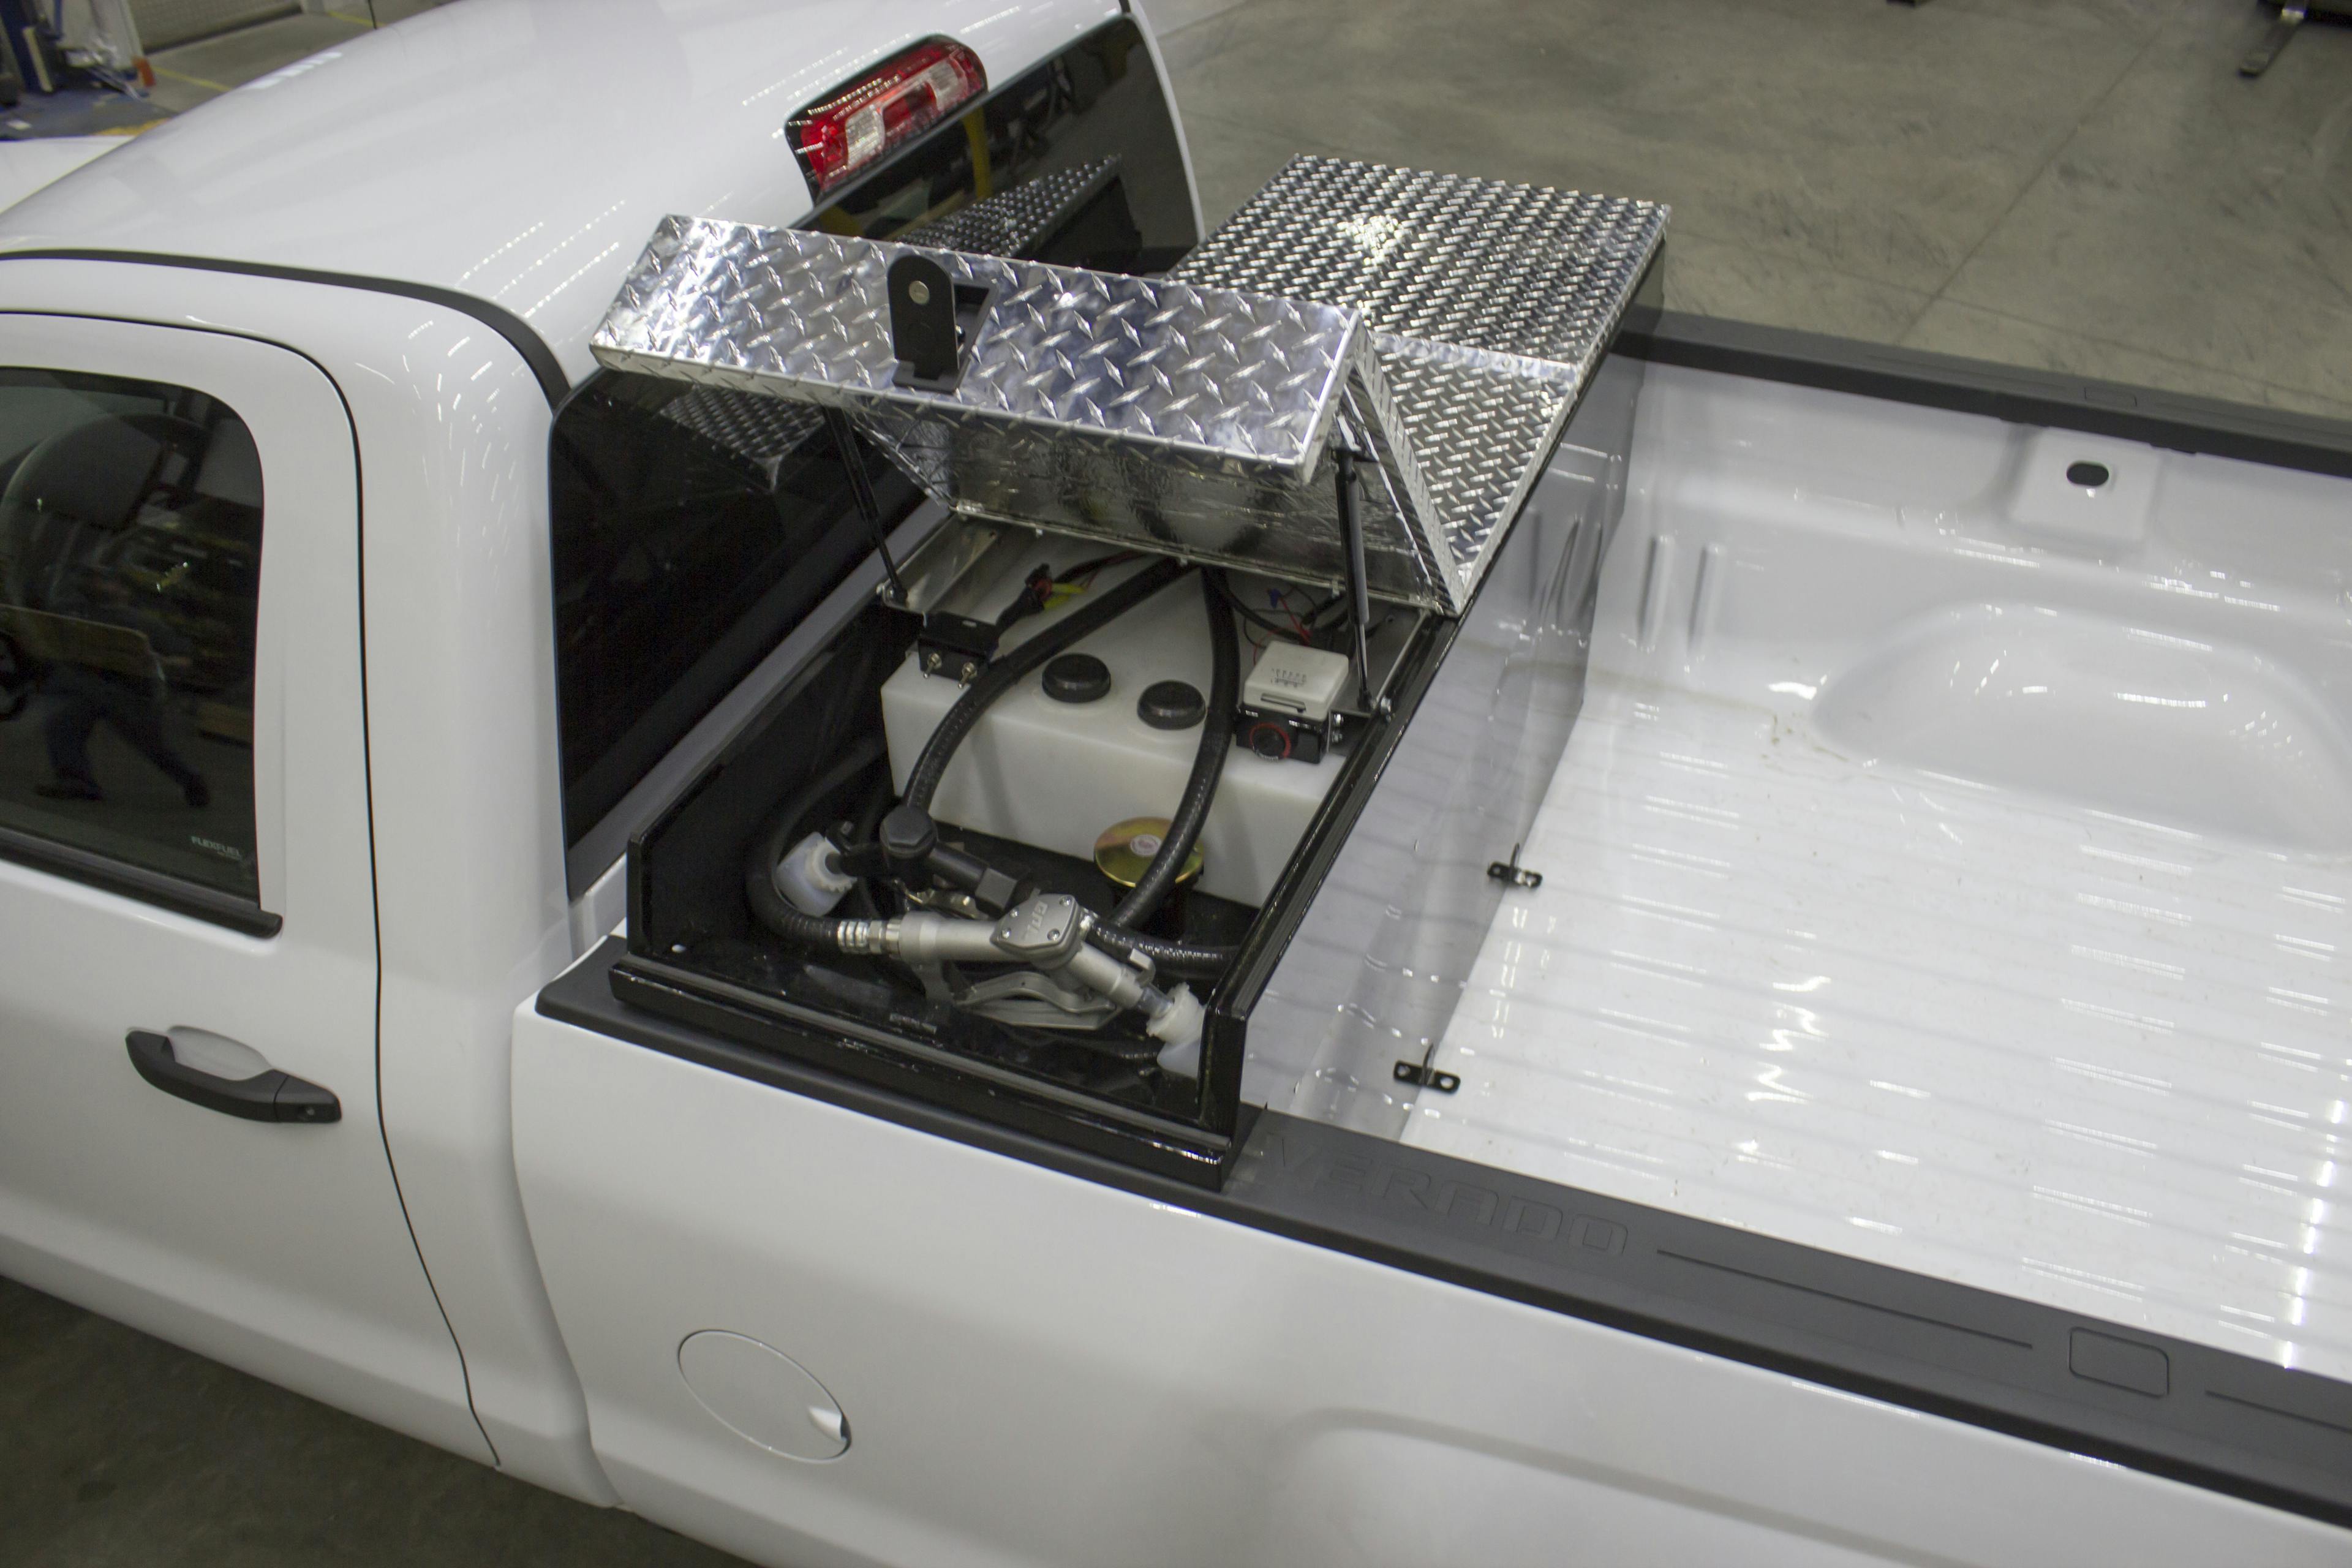 Thunder Creek Combo Diesel/DEF Transfer Tank Fits in Pickup Truck | Construction News